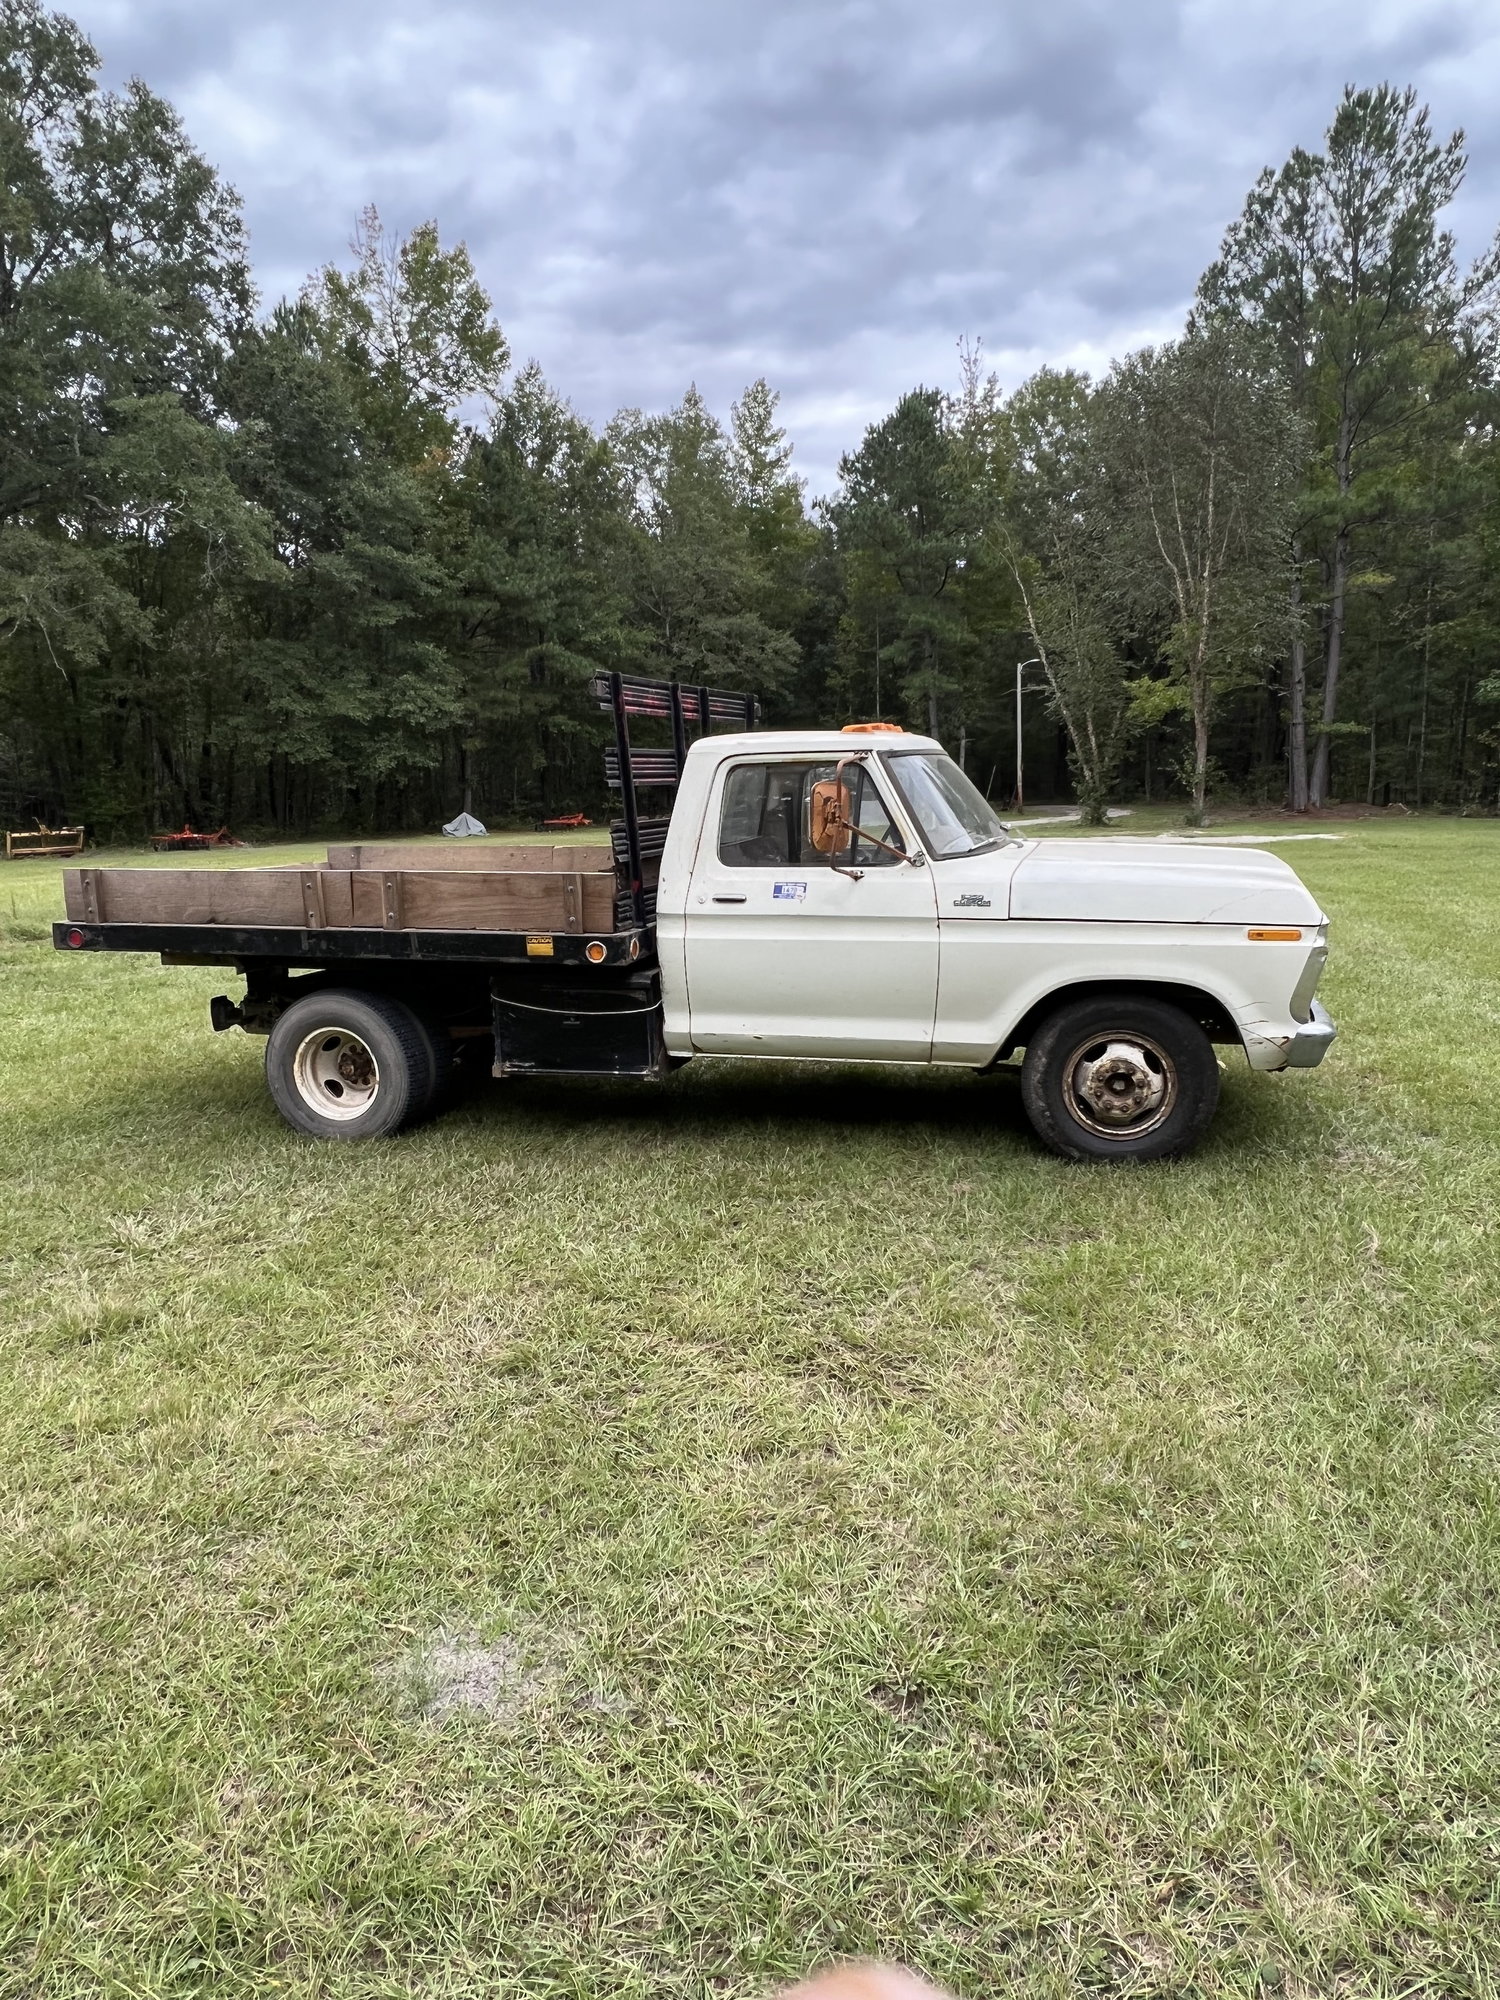 1977 Ford F-350 - 1977 F-350 flatbed dump.79k miles - Used - VIN F37SNY82494 - 79,800 Miles - 8 cyl - 2WD - Manual - Truck - White - Gadsden, SC 29052, United States